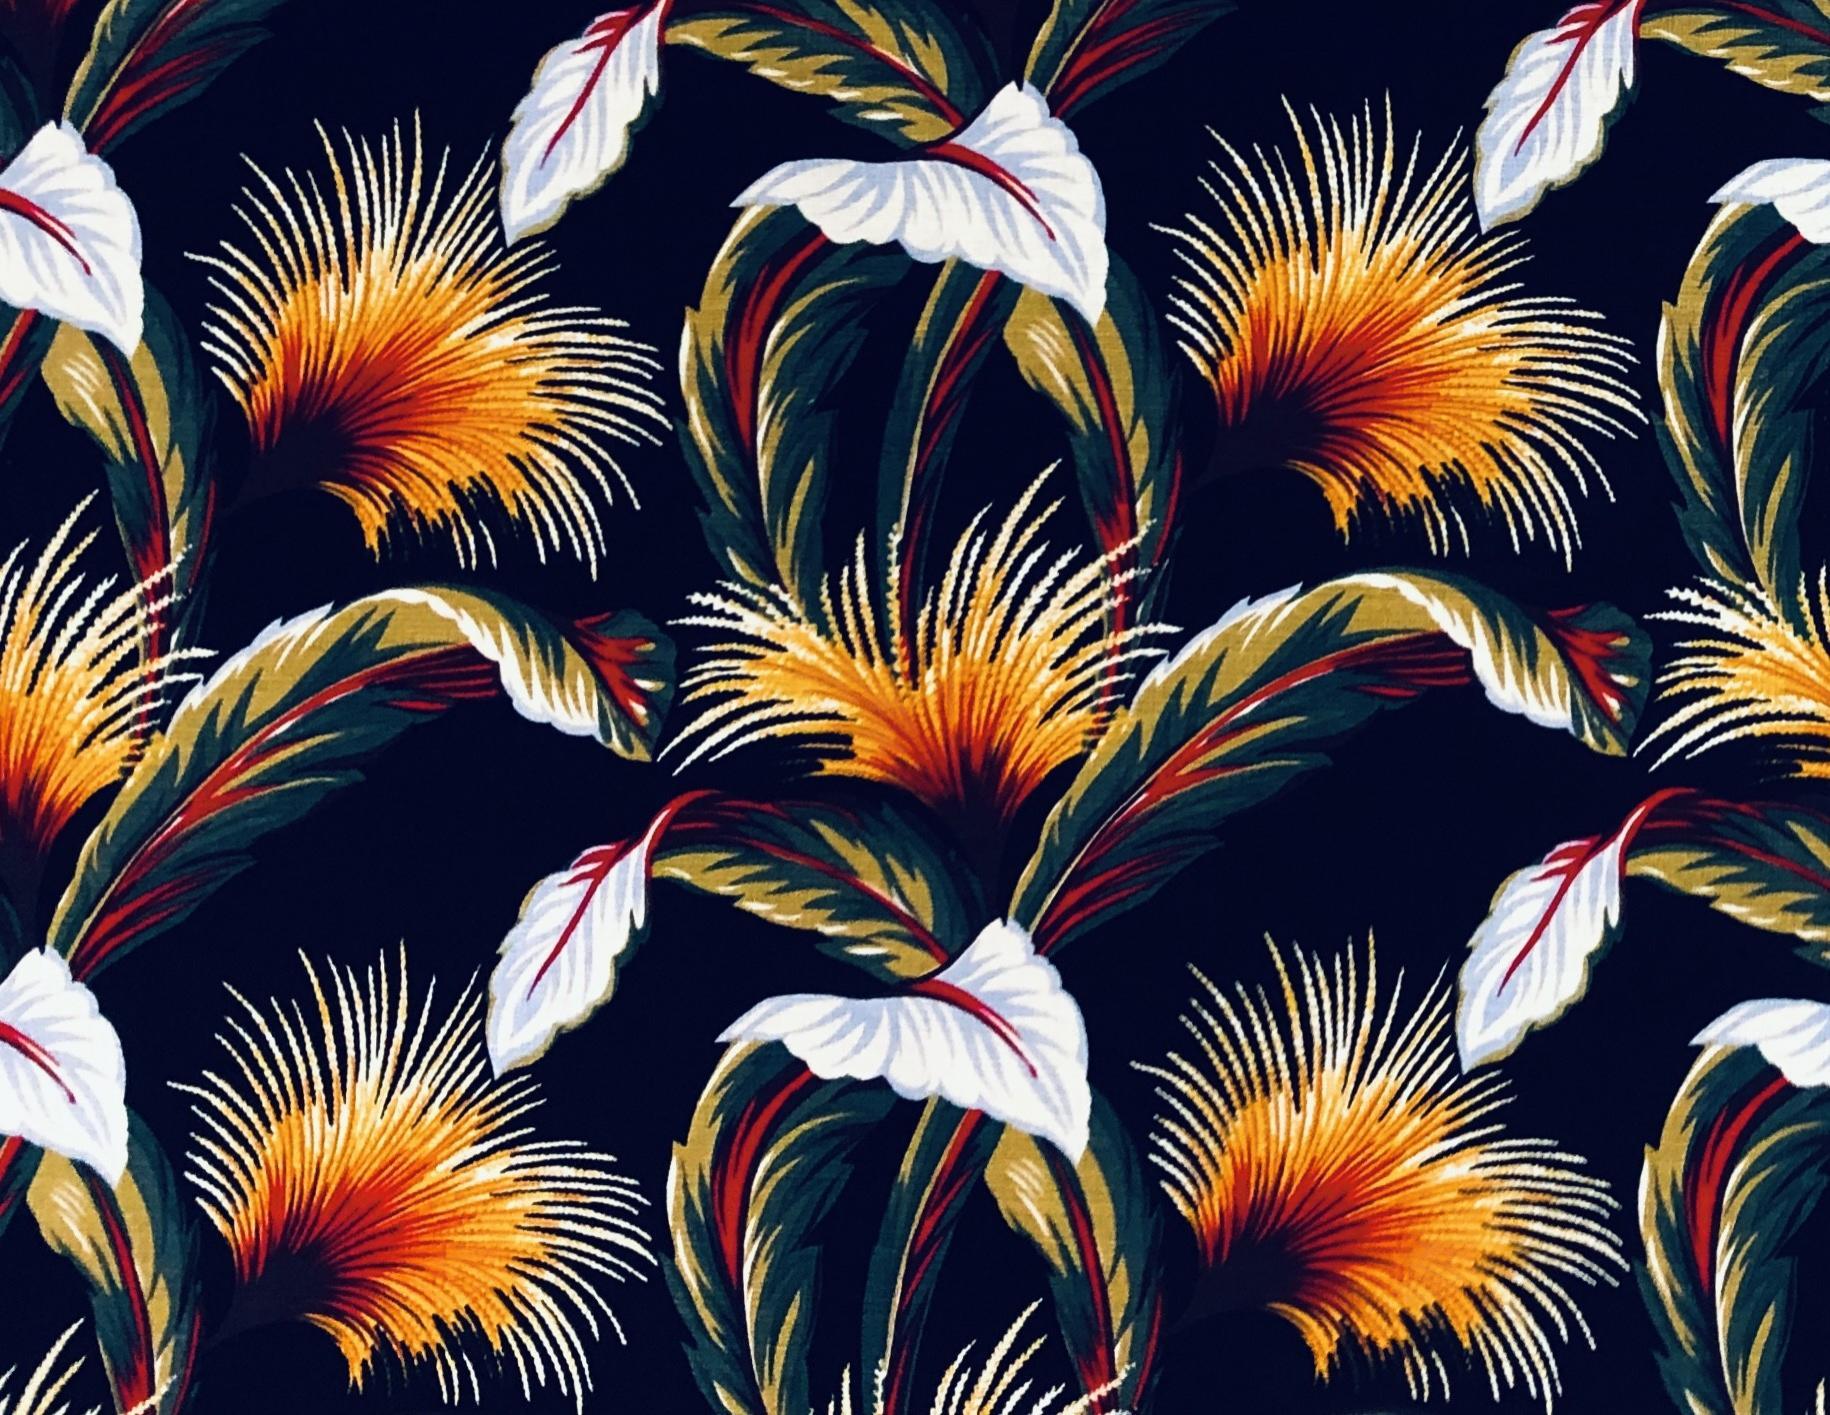 This beautiful 100% cotton fabric features a striking tropical print of yellow and orange flowers and radiant multicolored leaves on a black background. It's designed by Tradewind Tropicals for Hoffman Fabrics #HMED003 in 2001. This fabric is